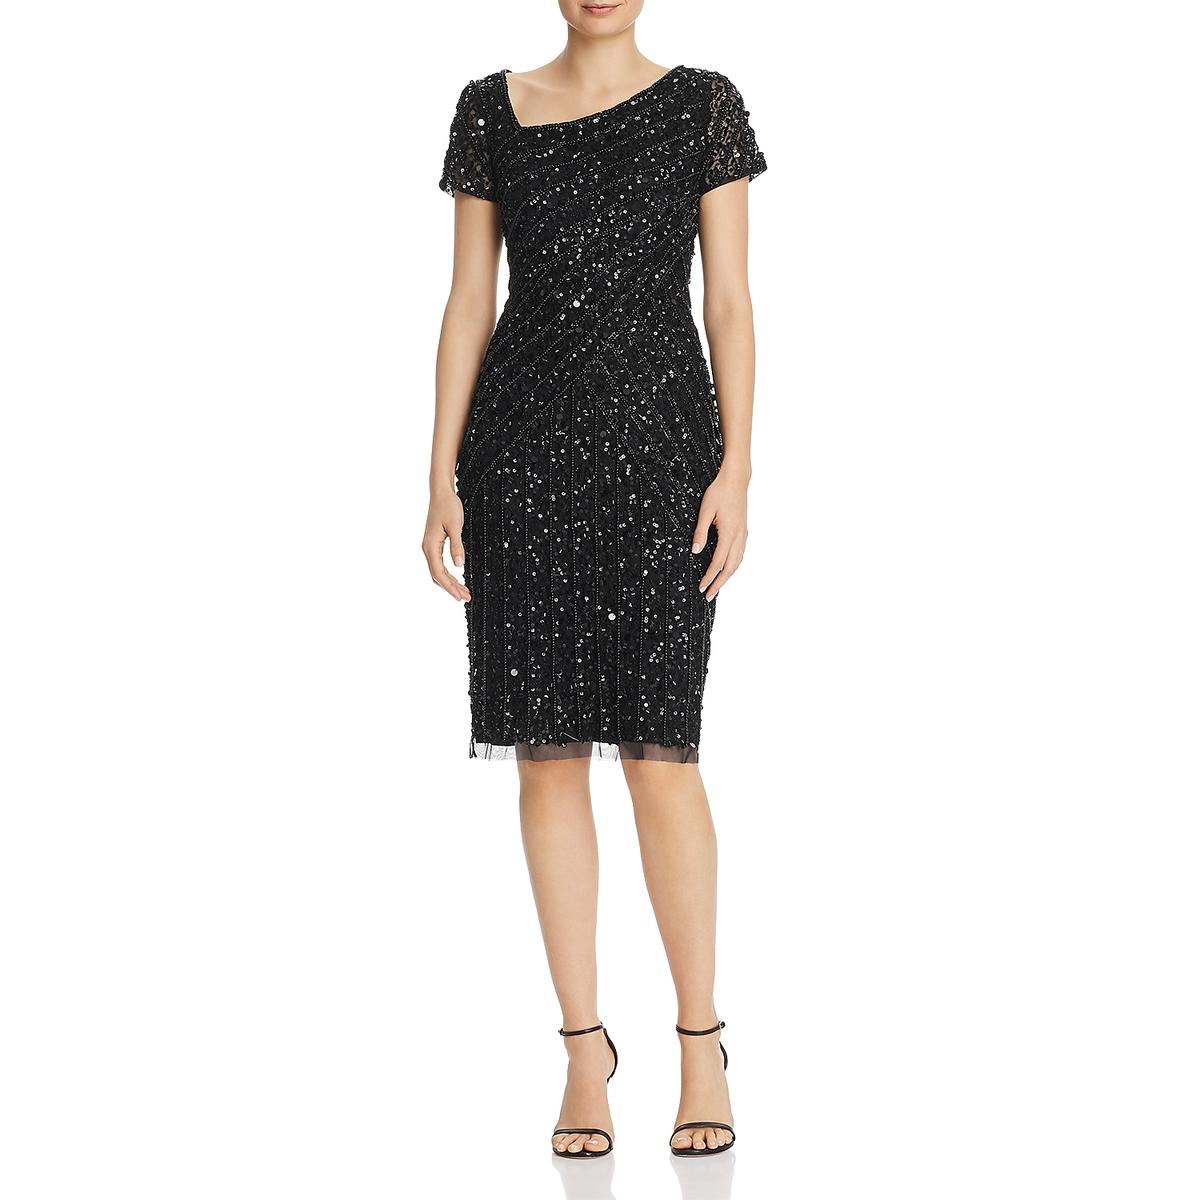 Adrianna Papell Womens Black Beaded Party Cocktail Dress 2 BHFO 3683 ...